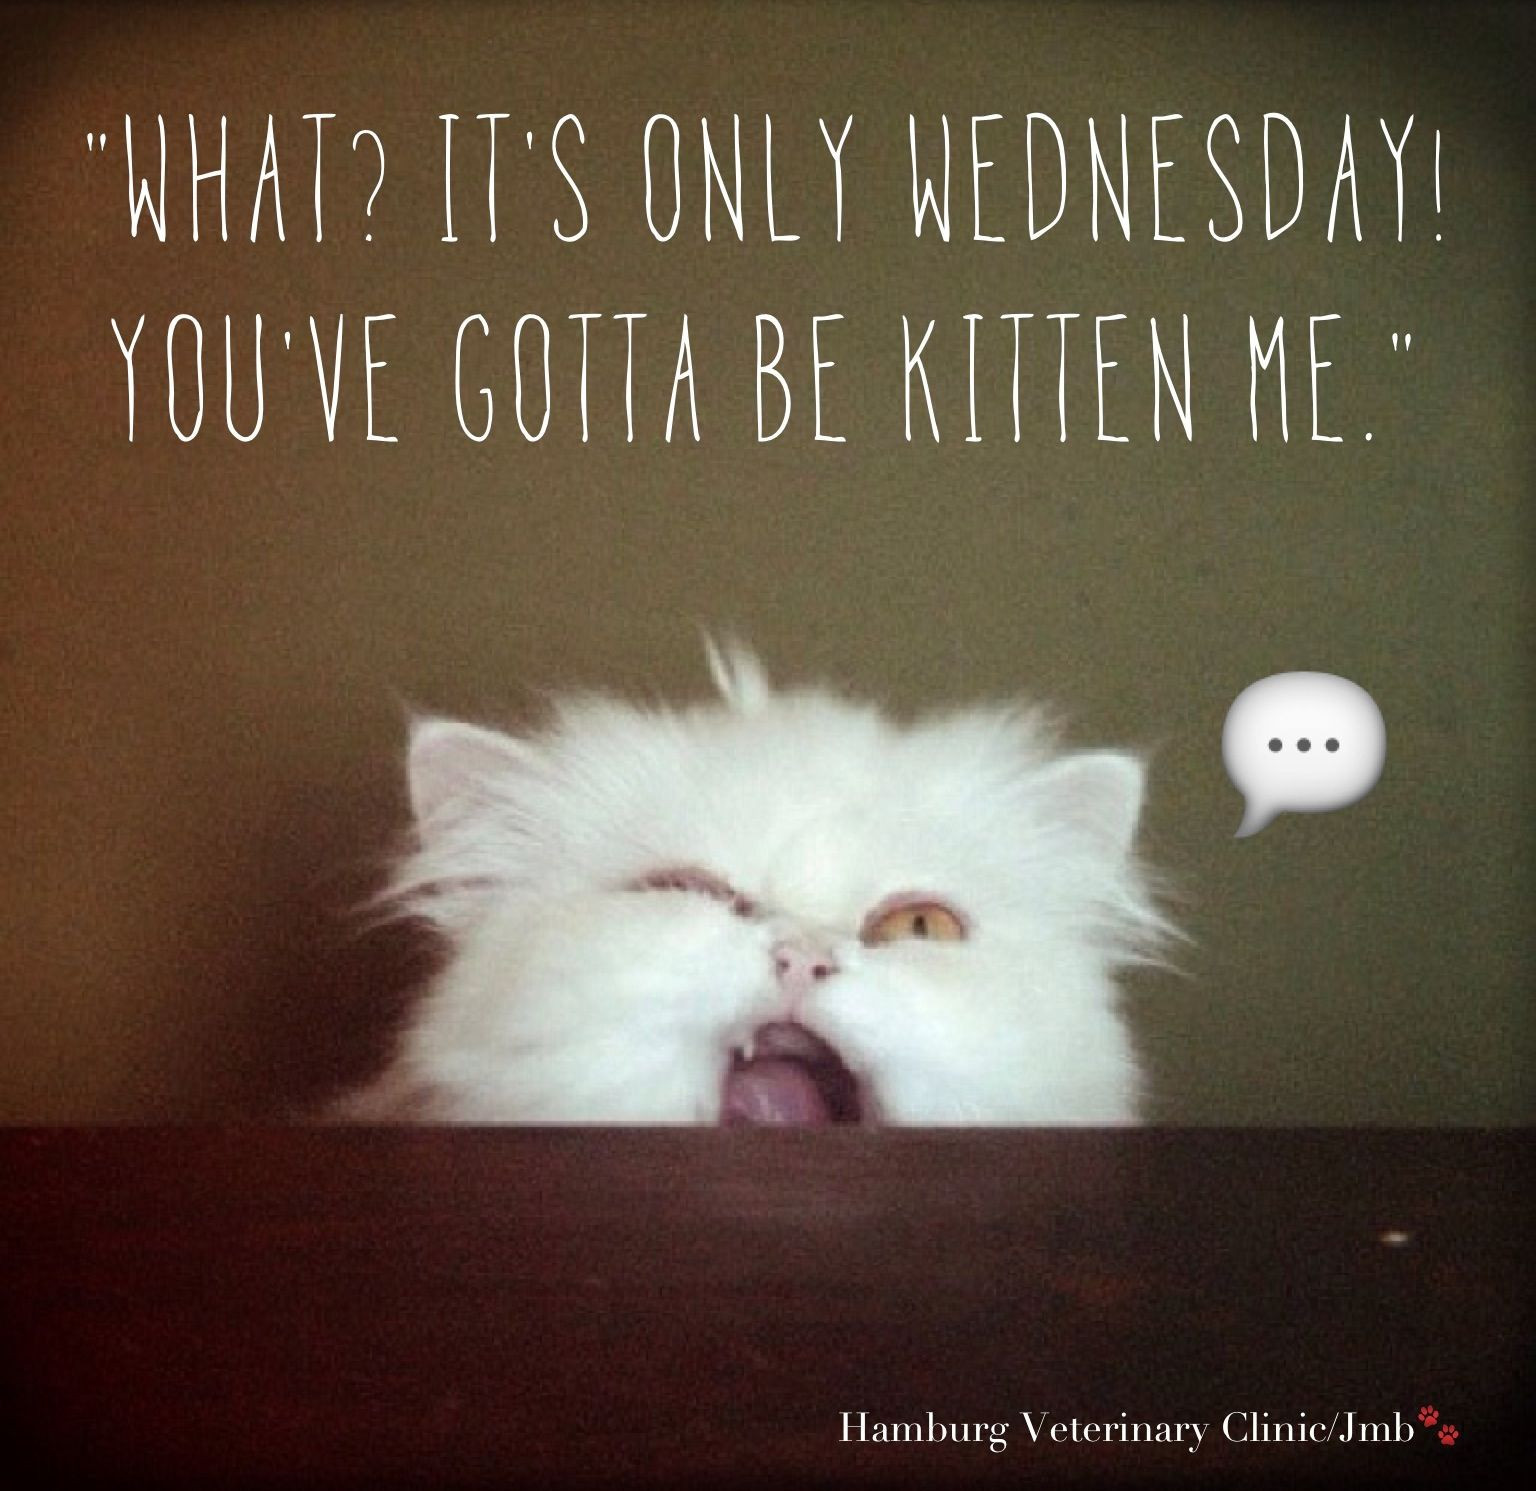 Wednesday Quotes Funny
 Wednesday funny Animal Humor What It s only Wednesday